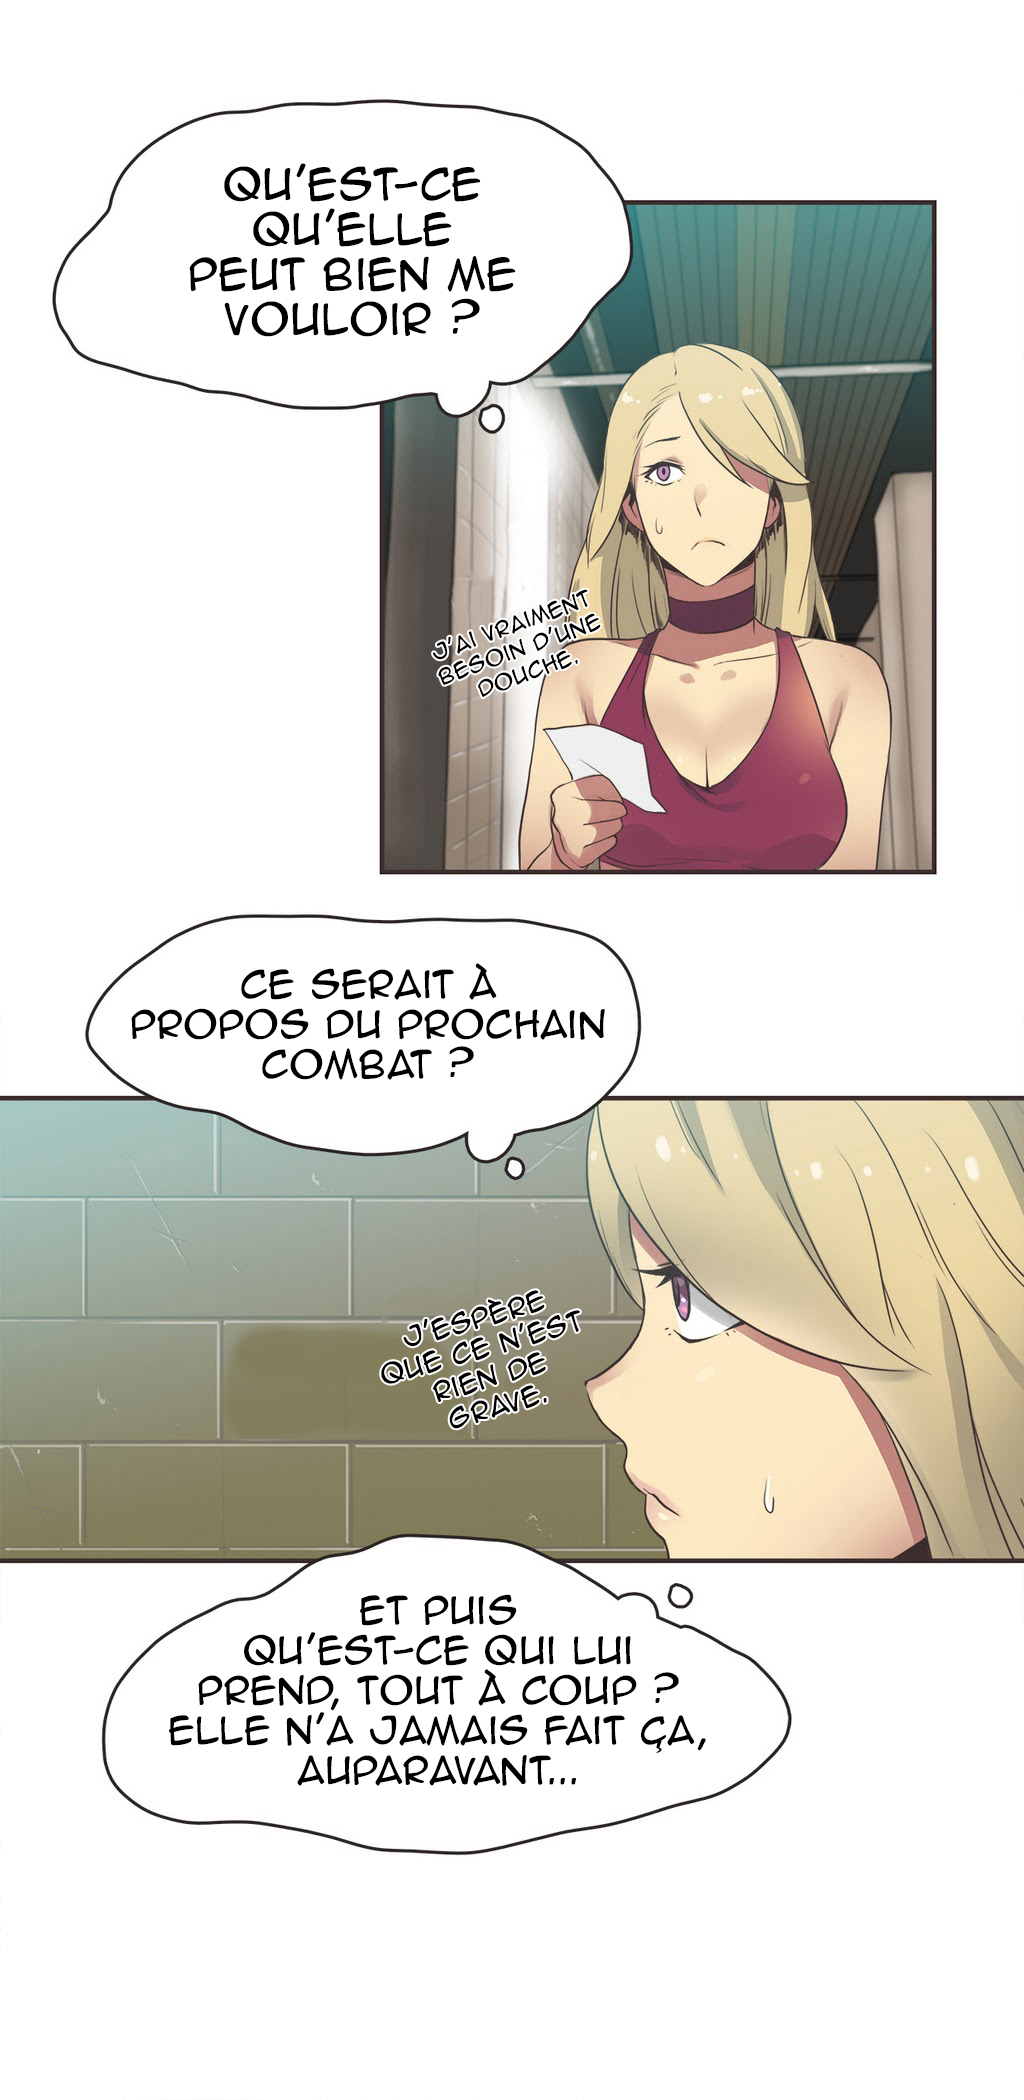 Sports Girl 19 [O-S](french) 